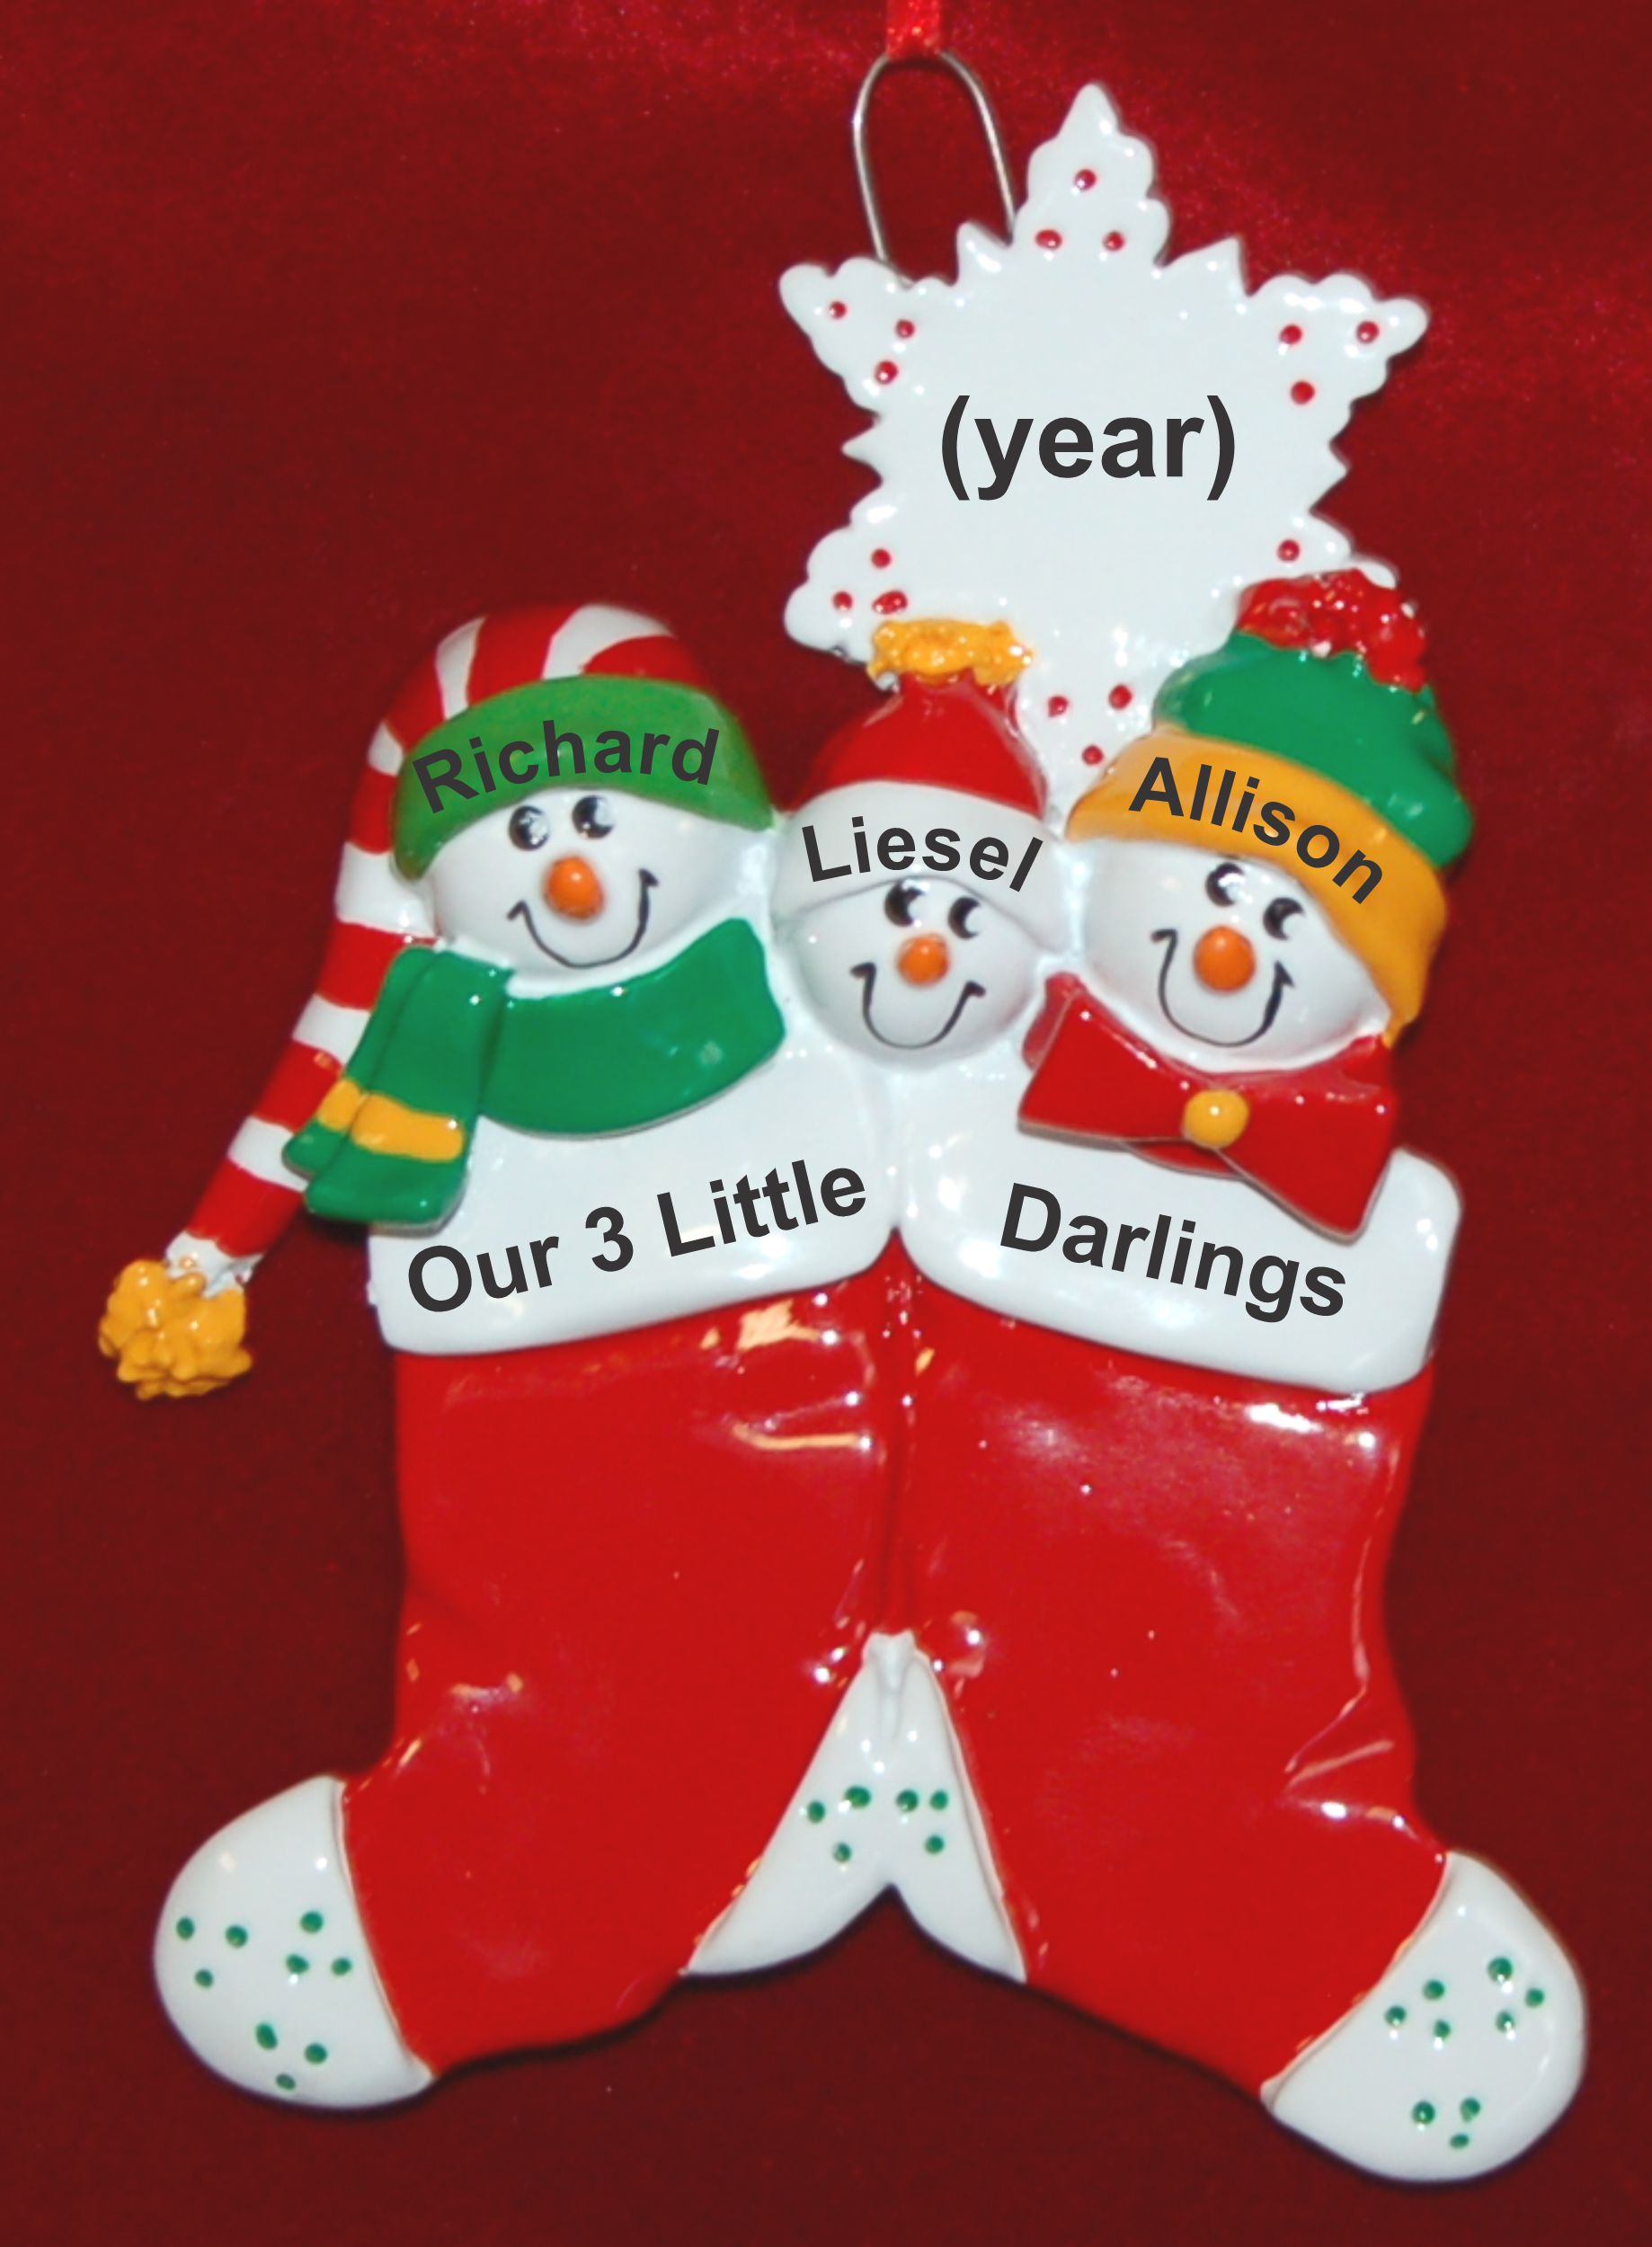 Family Christmas Ornament Festive Stockings Just the 3 Kids Personalized by RussellRhodes.com